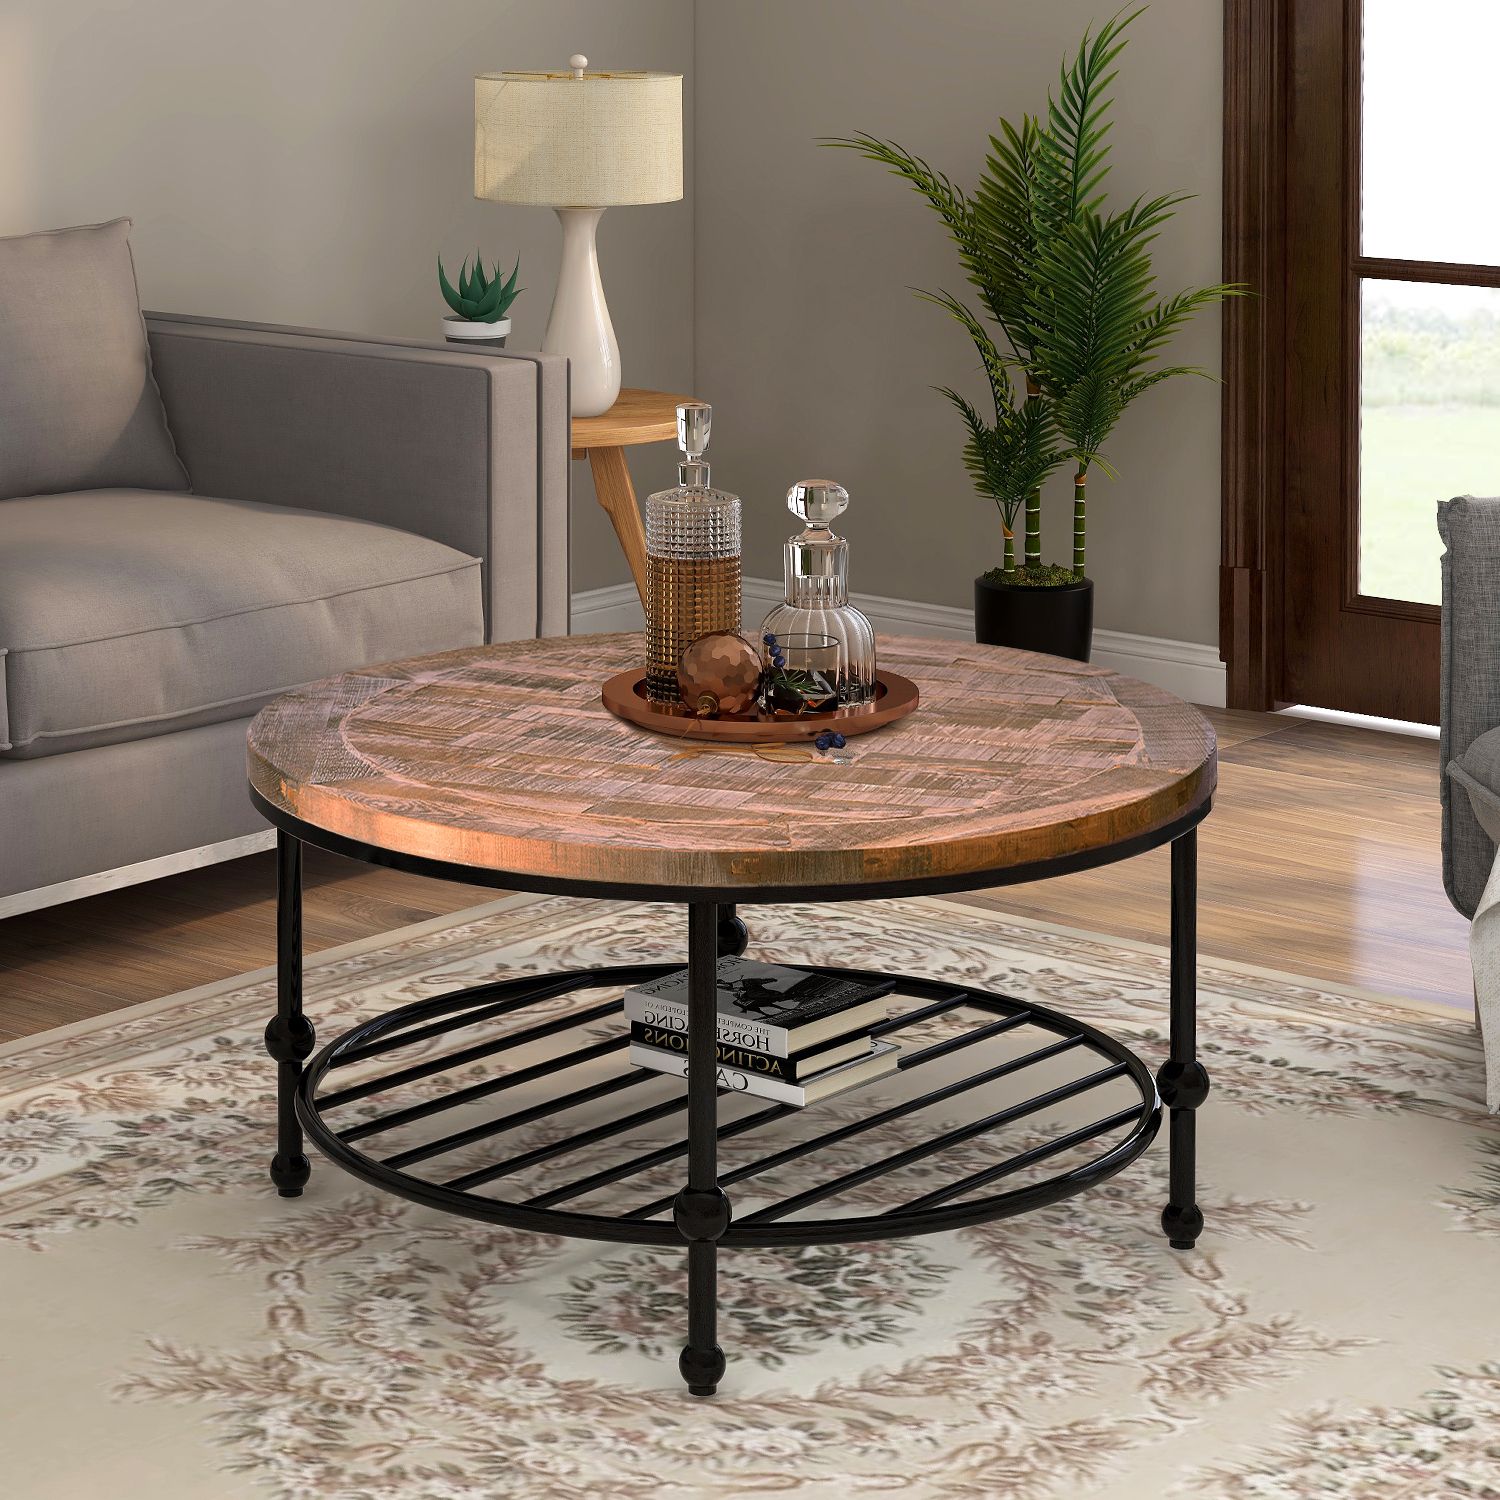 Round Coffee Table, Farmhouse Coffee Table, Rustic Brown Intended For 2019 2 Piece Round Coffee Tables Set (View 1 of 20)